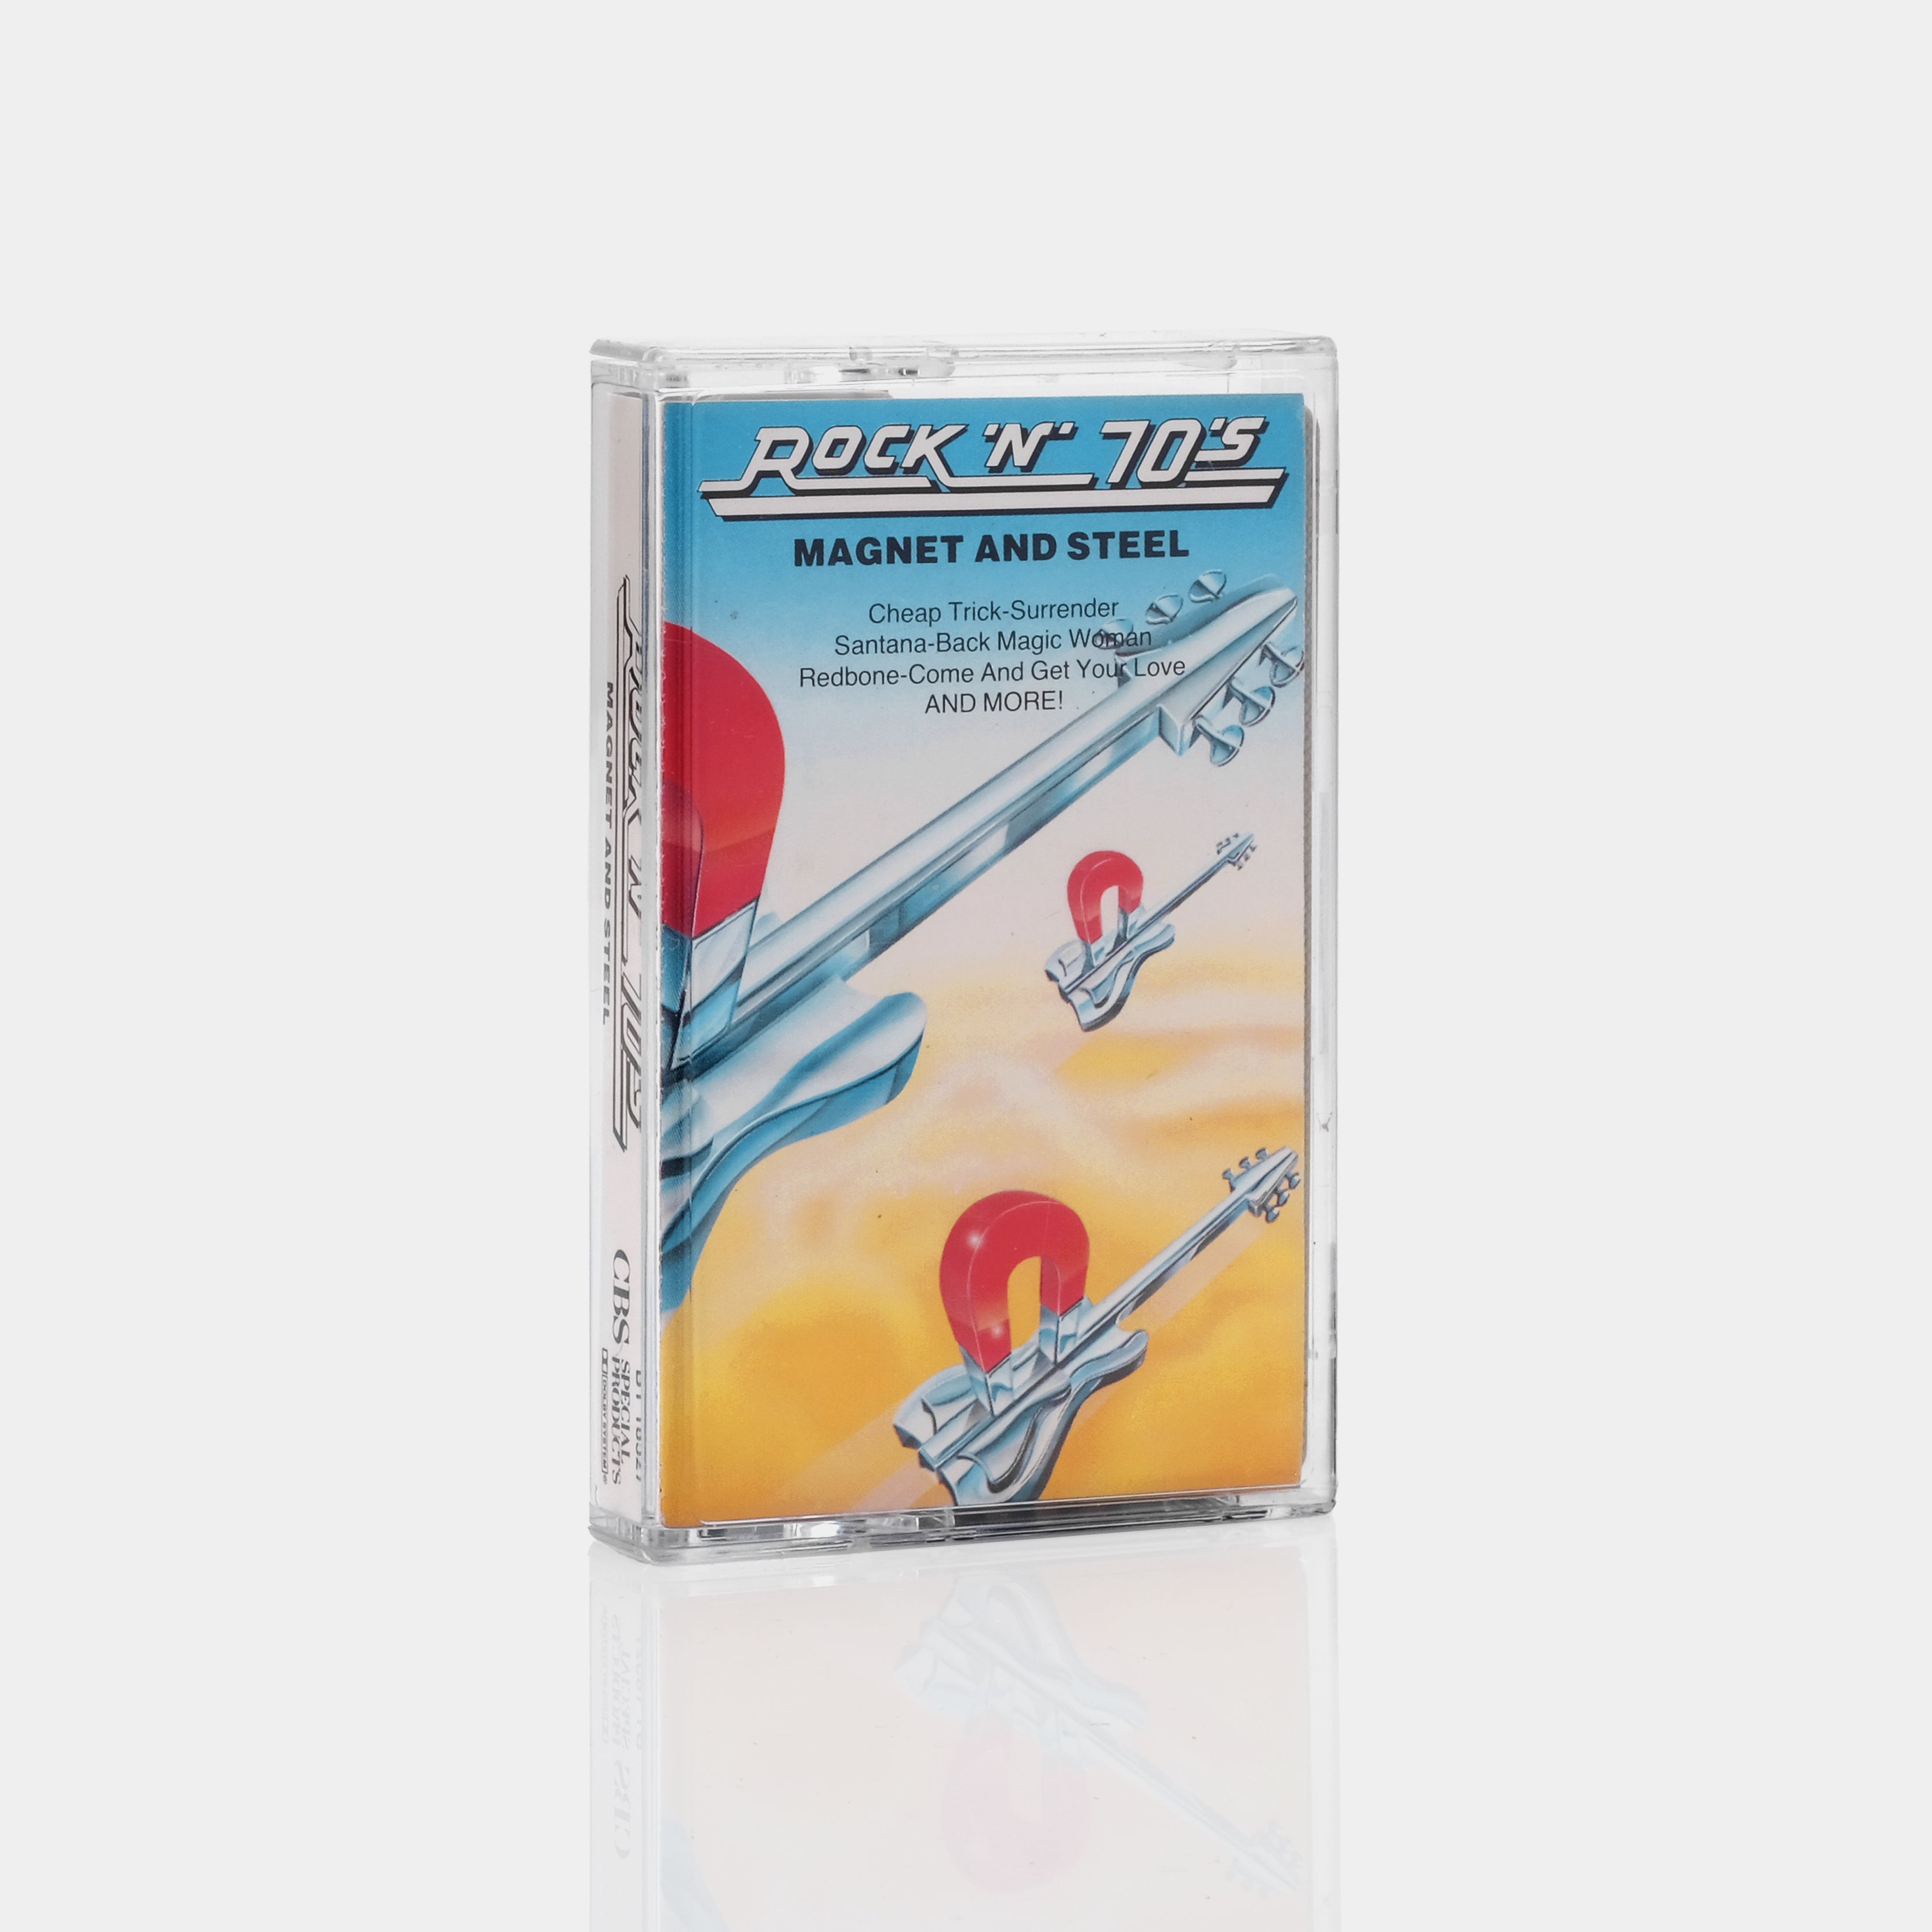 Rock 'N' 70's - Are You Ready? Cassette Tape